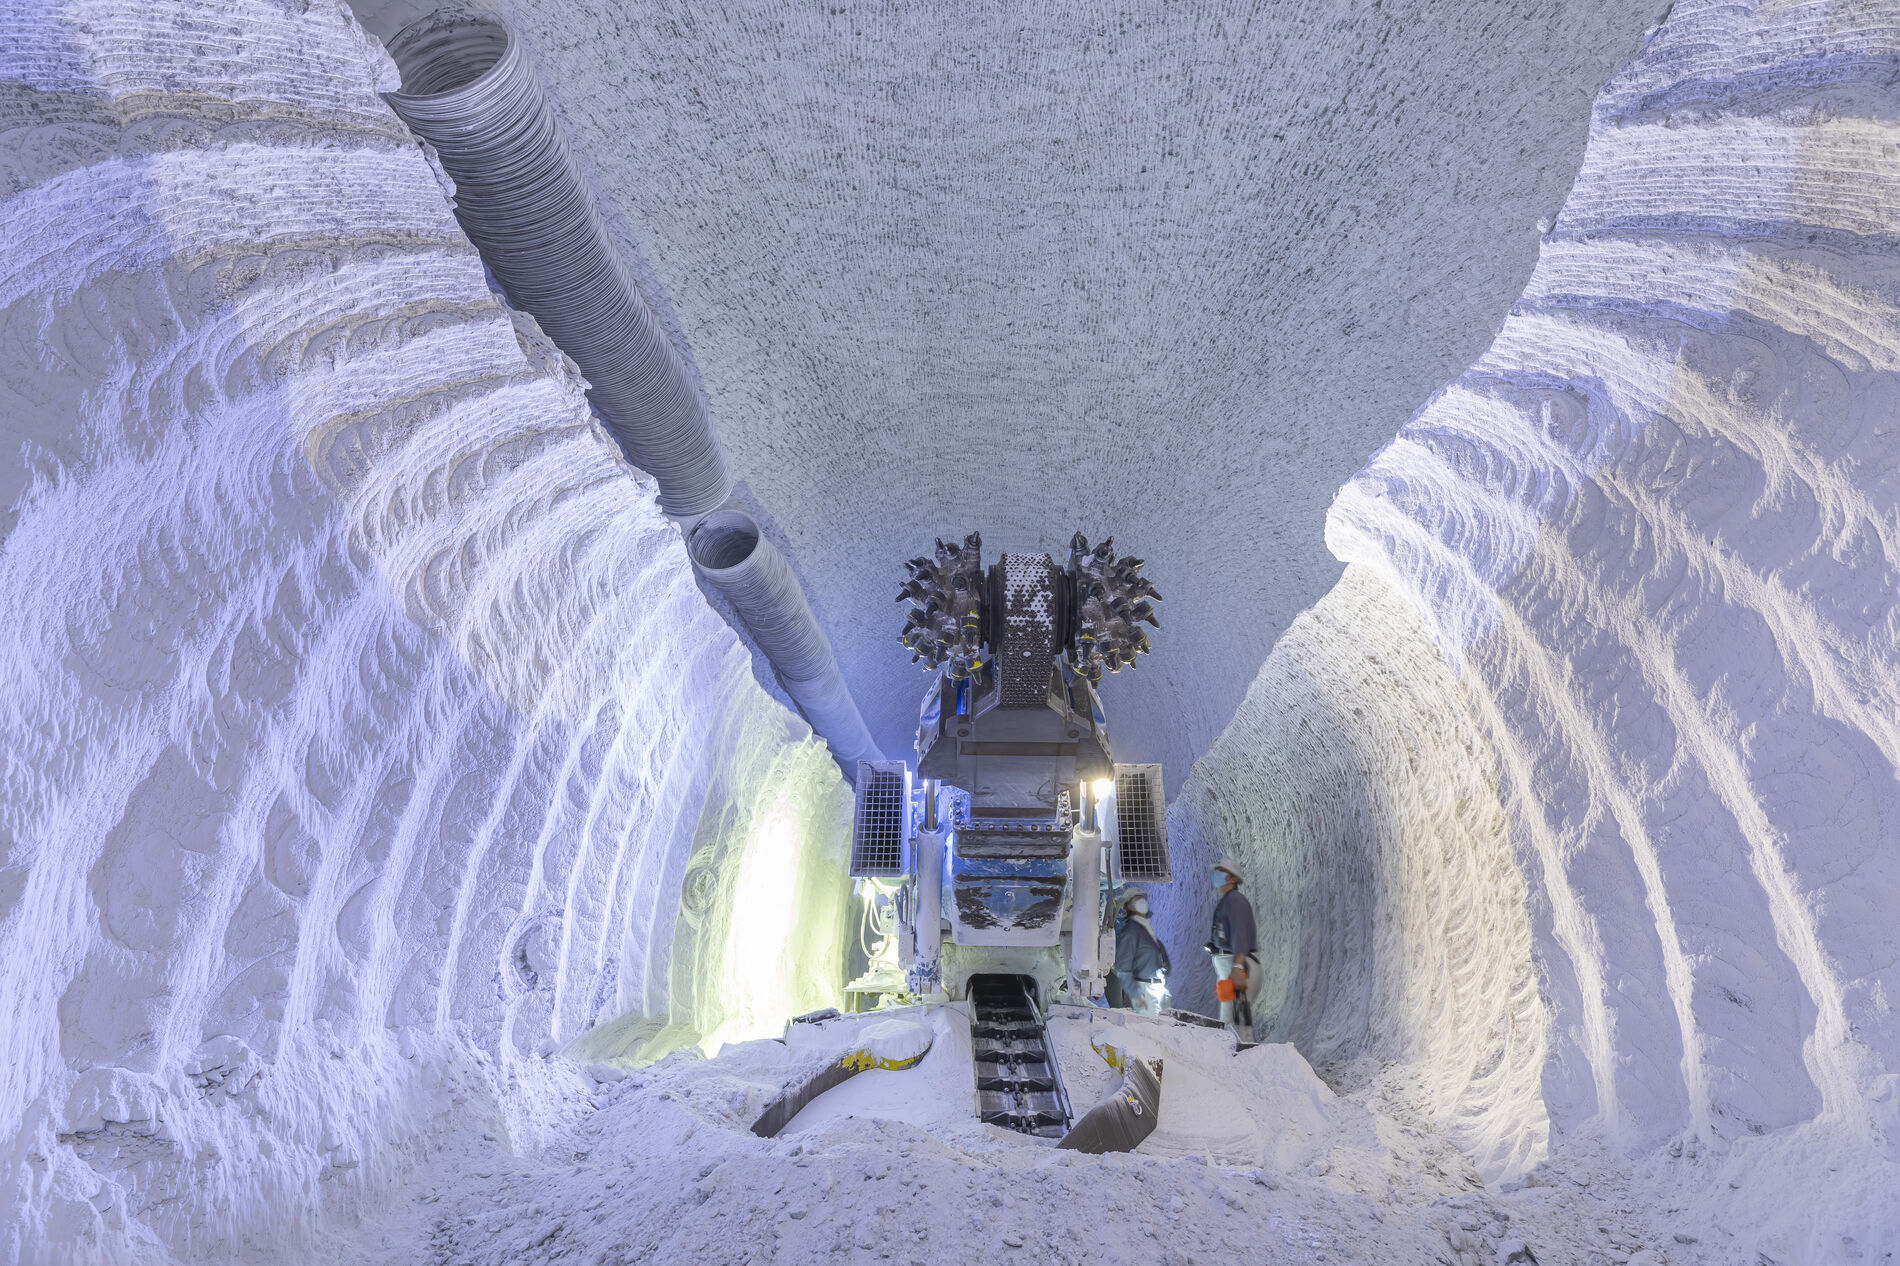 Two miners stand next to a large machine in a white chamber made of salt underground.